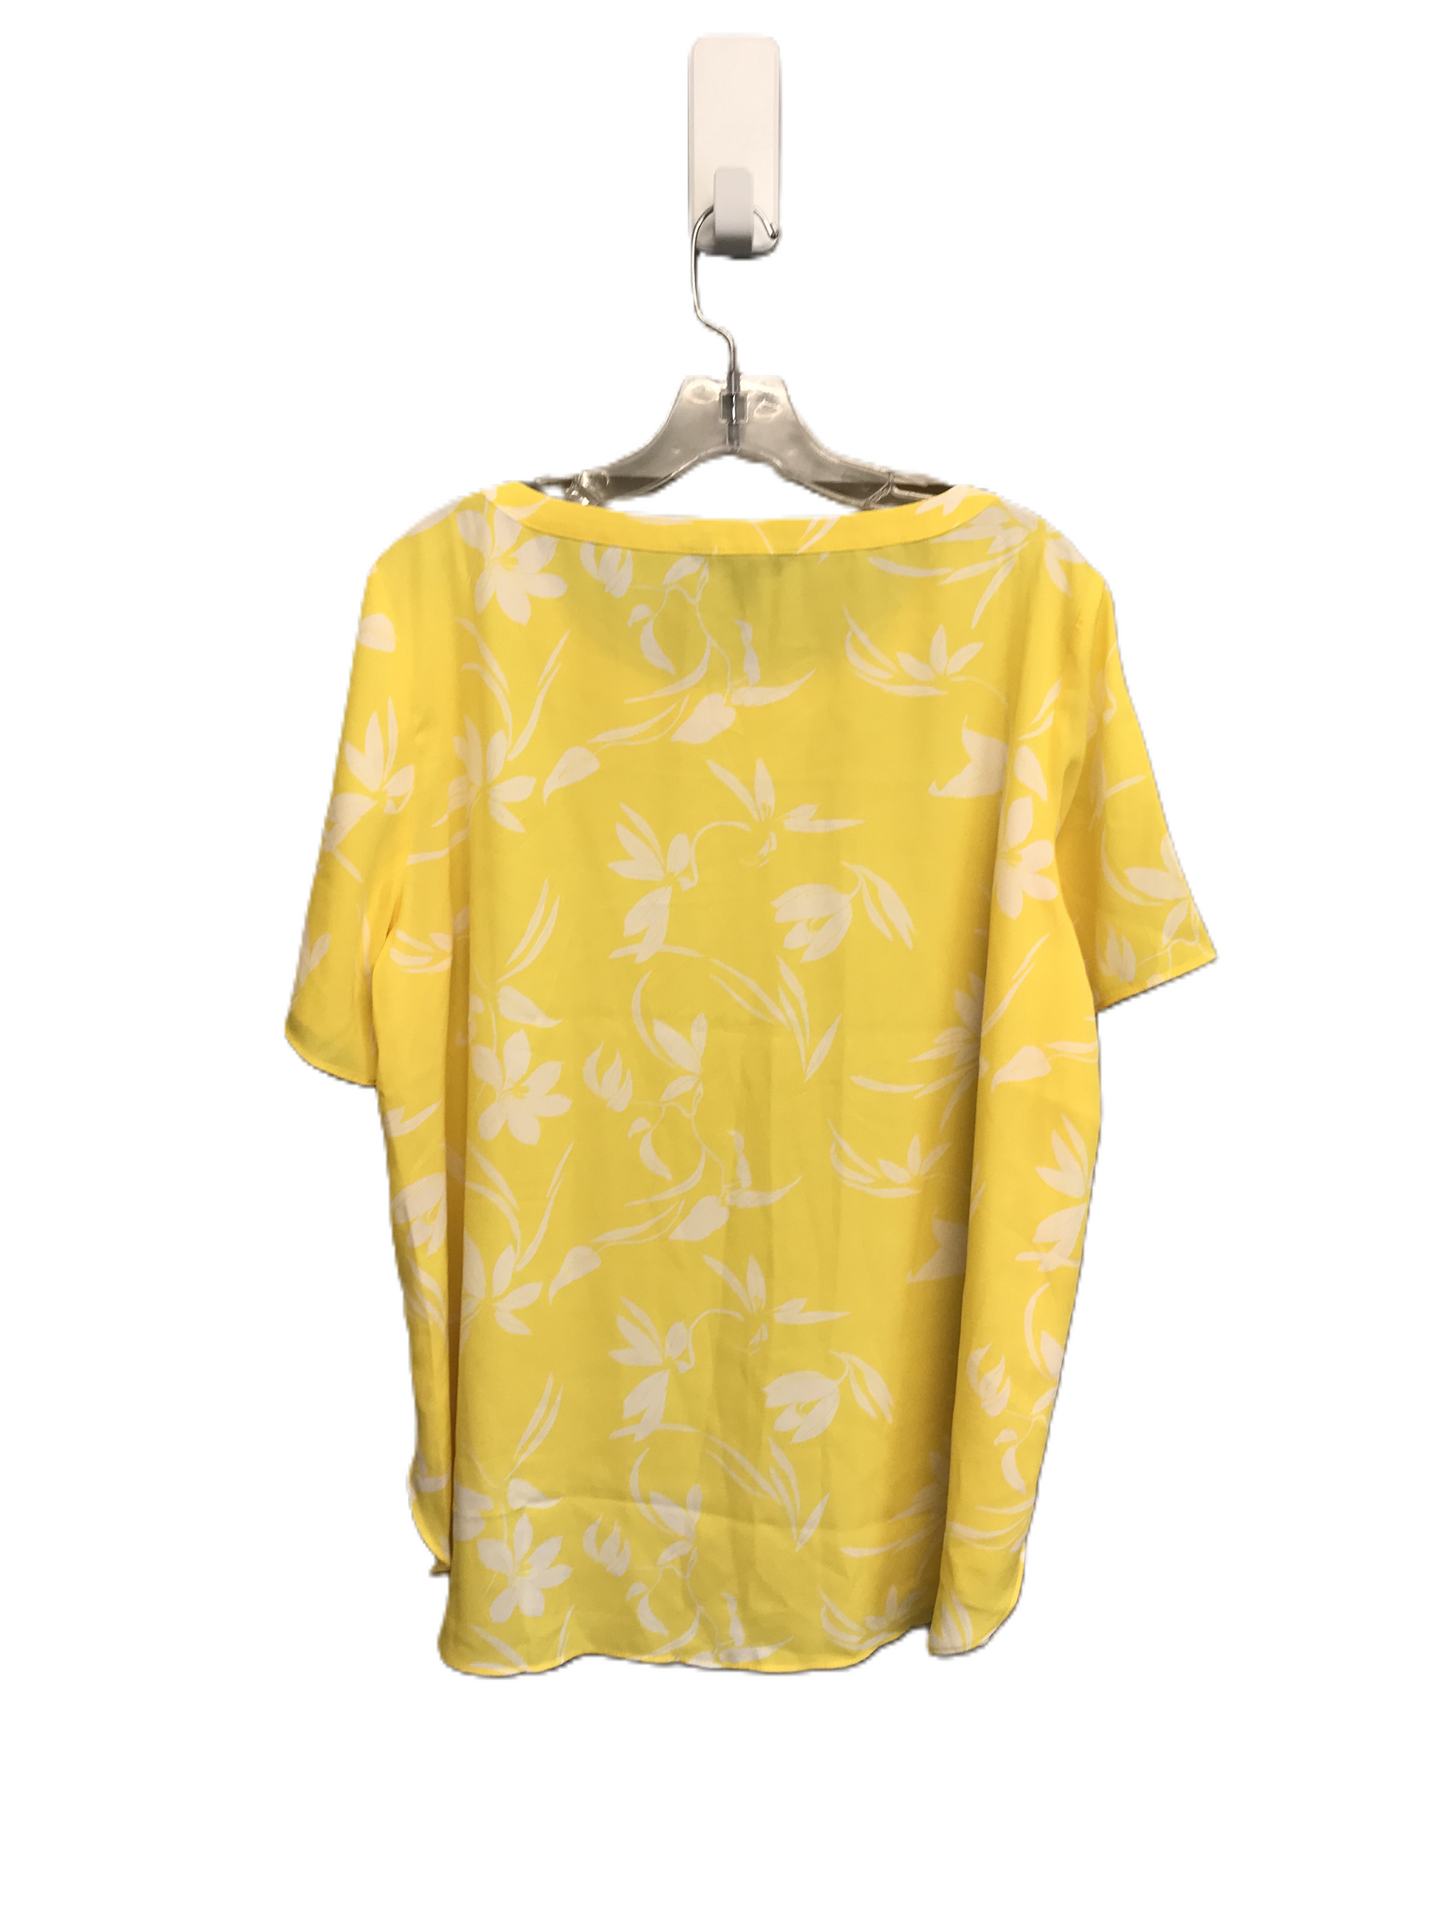 White & Yellow Top Short Sleeve By Banana Republic, Size: L